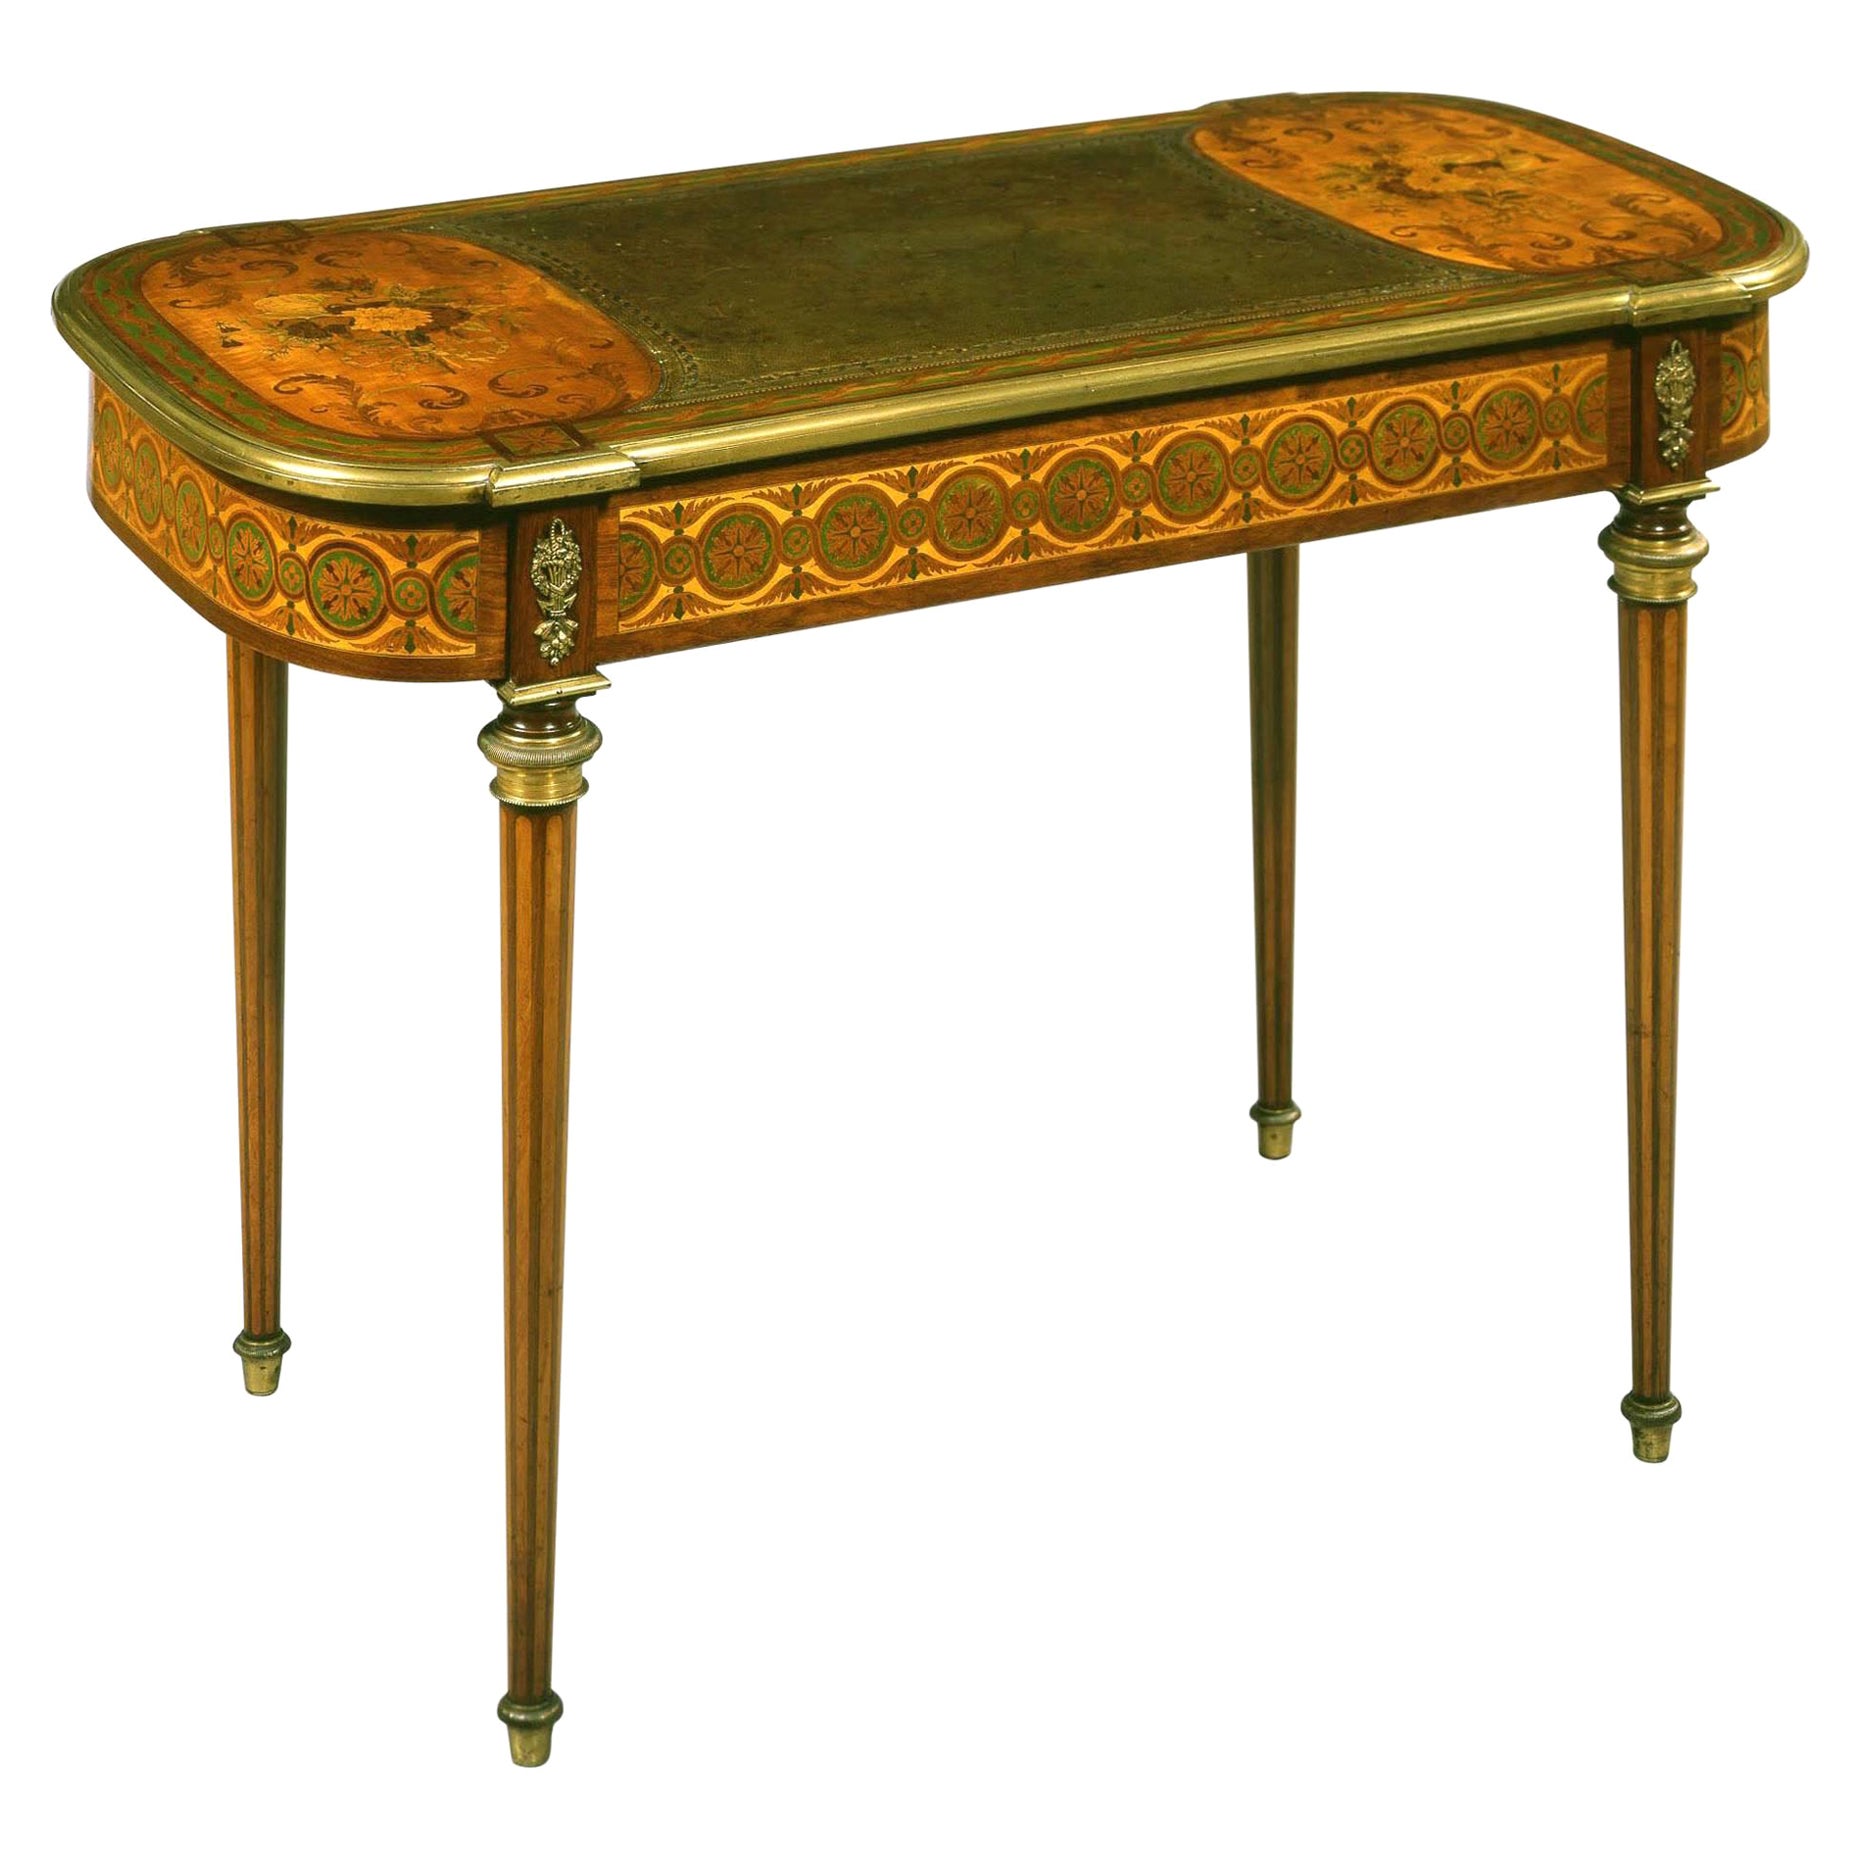 French 19th Century Green Satinwood Marquetry Table with Leather Top